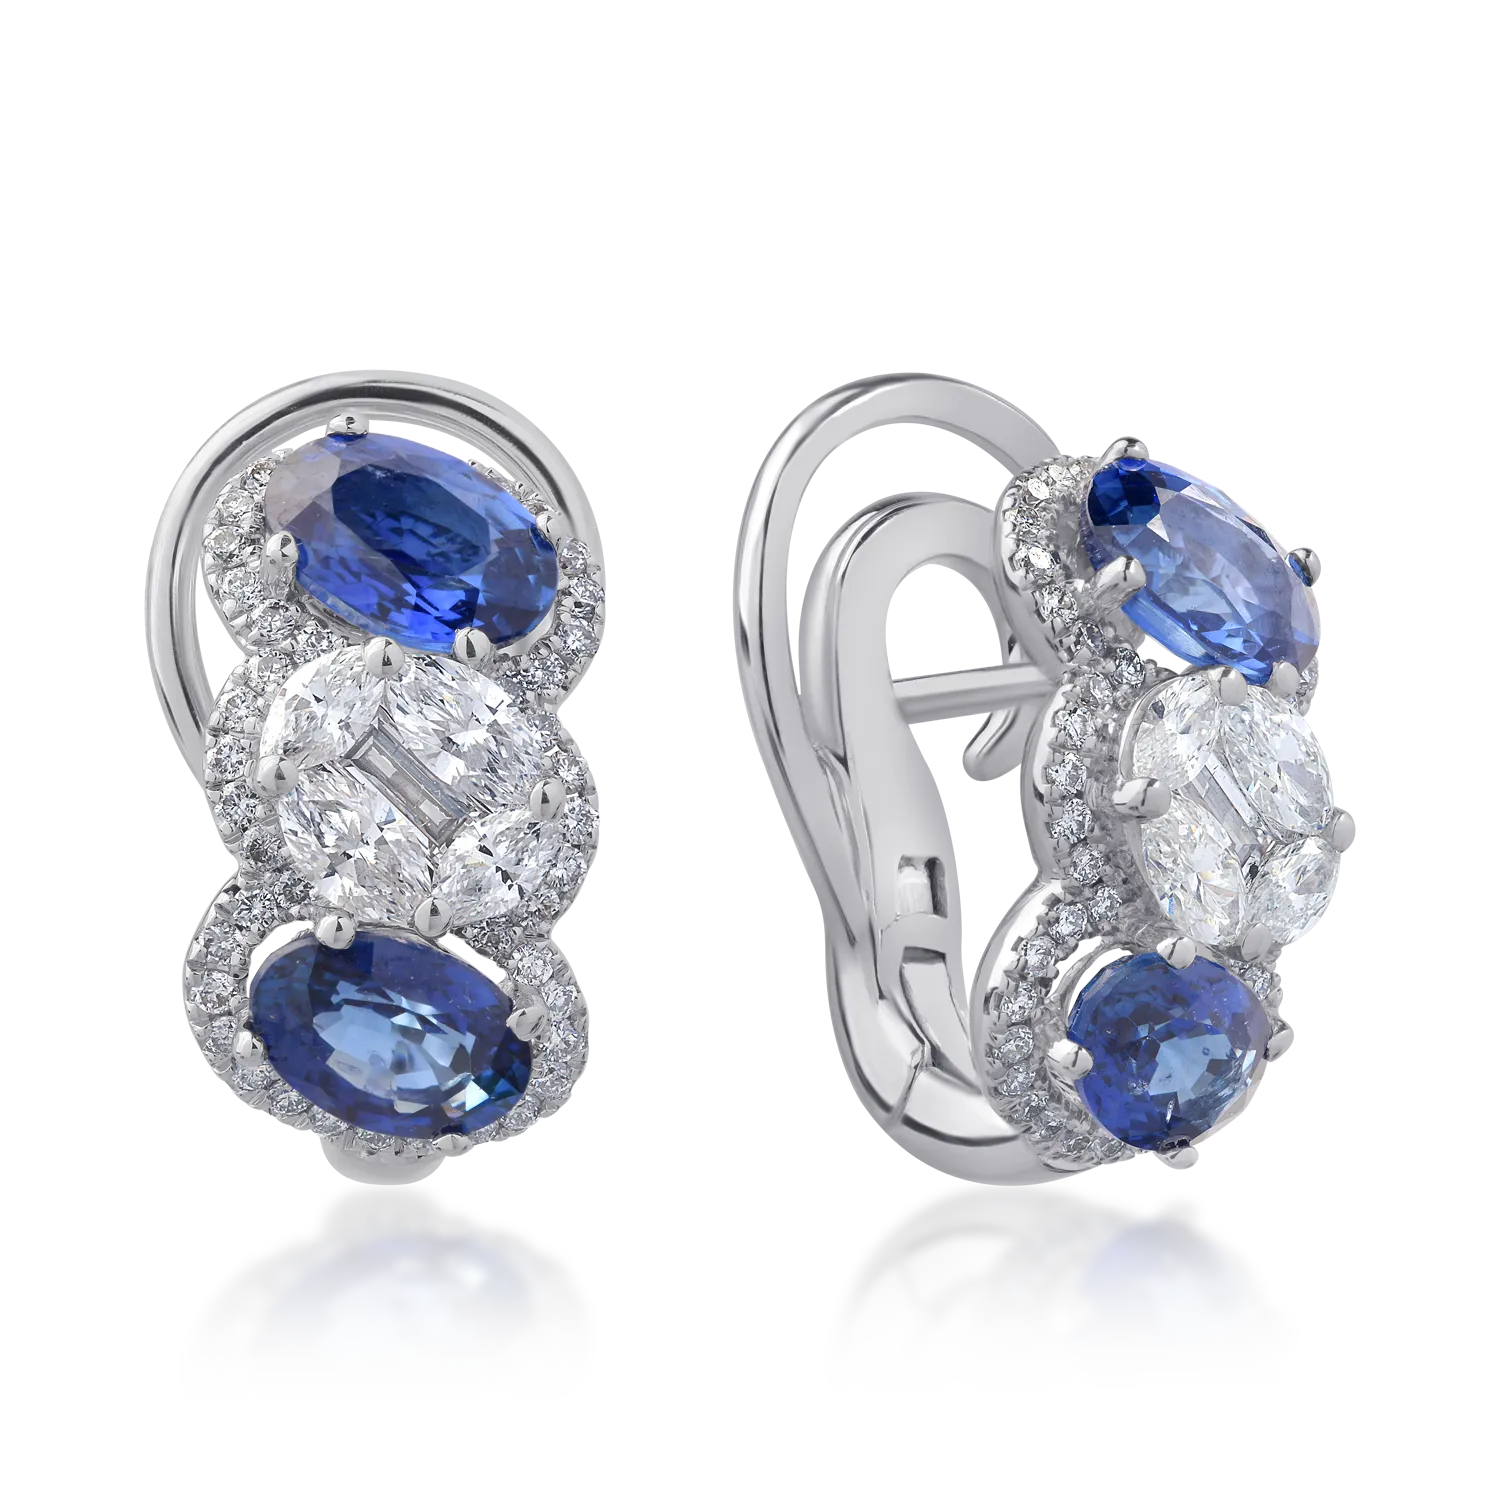 18K white gold earrings with 2.26ct sapphires and 0.52ct diamonds